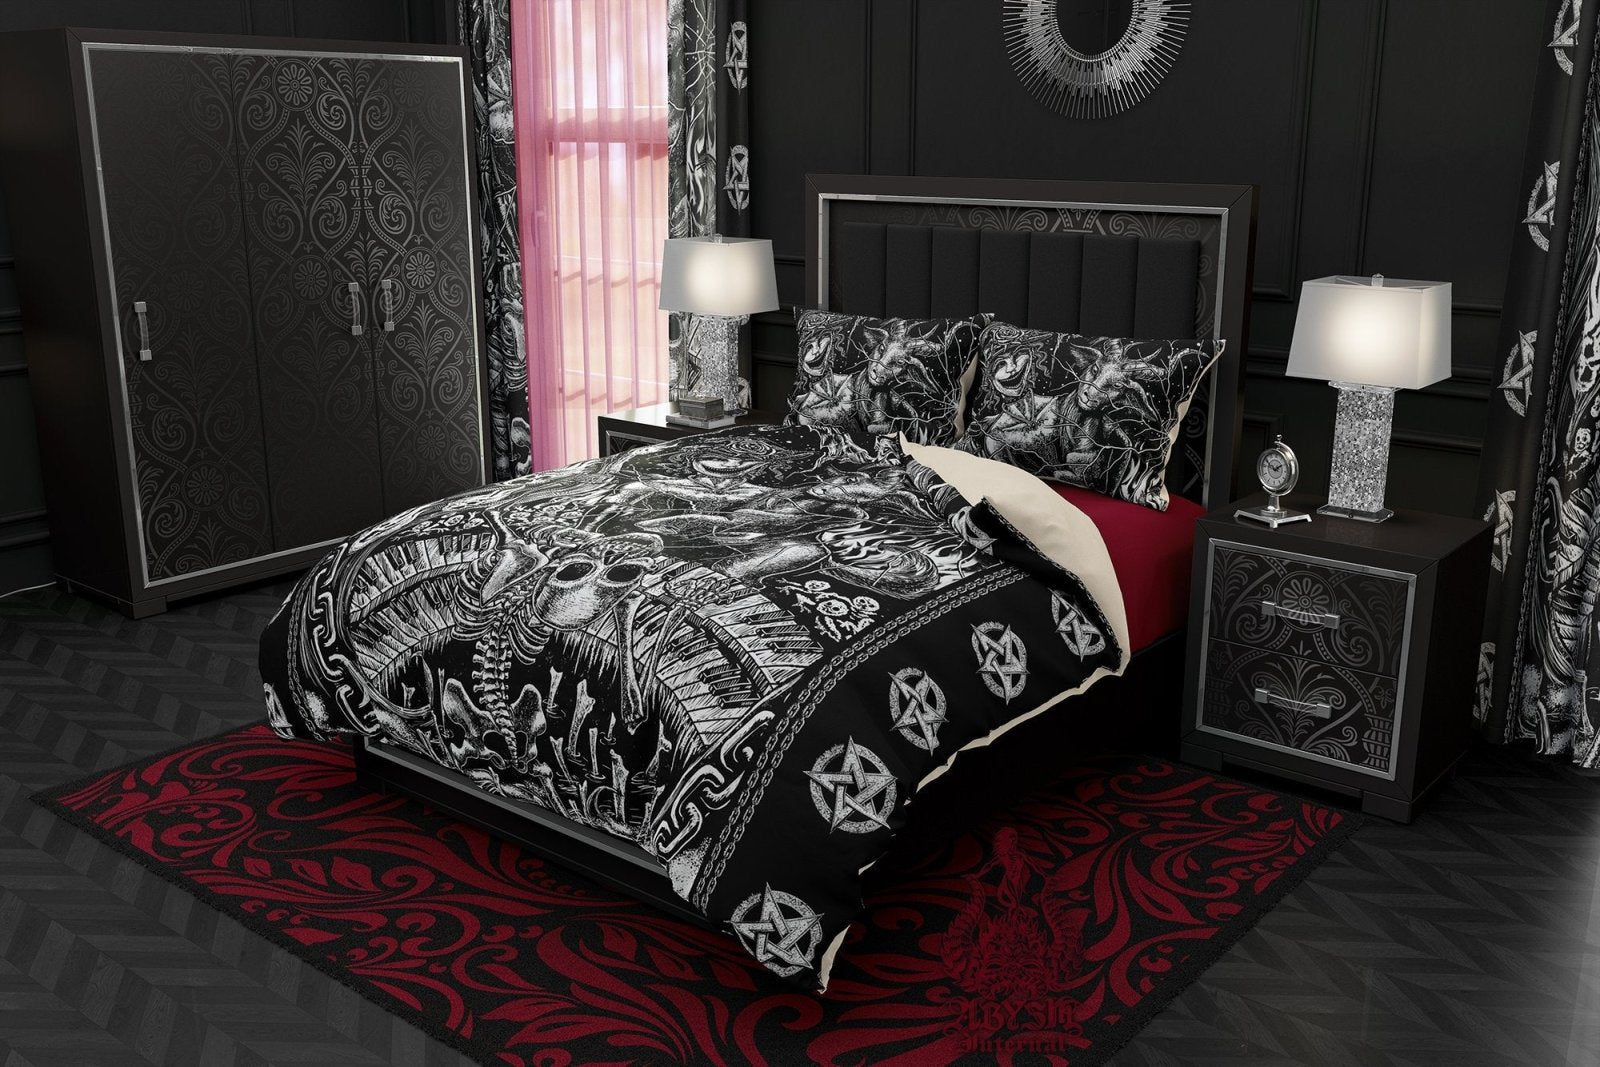 This is an awesome gothic style bedroom! #gothic #gothicbedroom  #gothicbedroomdecor #gothichomedecor #gothicst… | Gothic room, Dark home  decor, Gothic decor bedroom